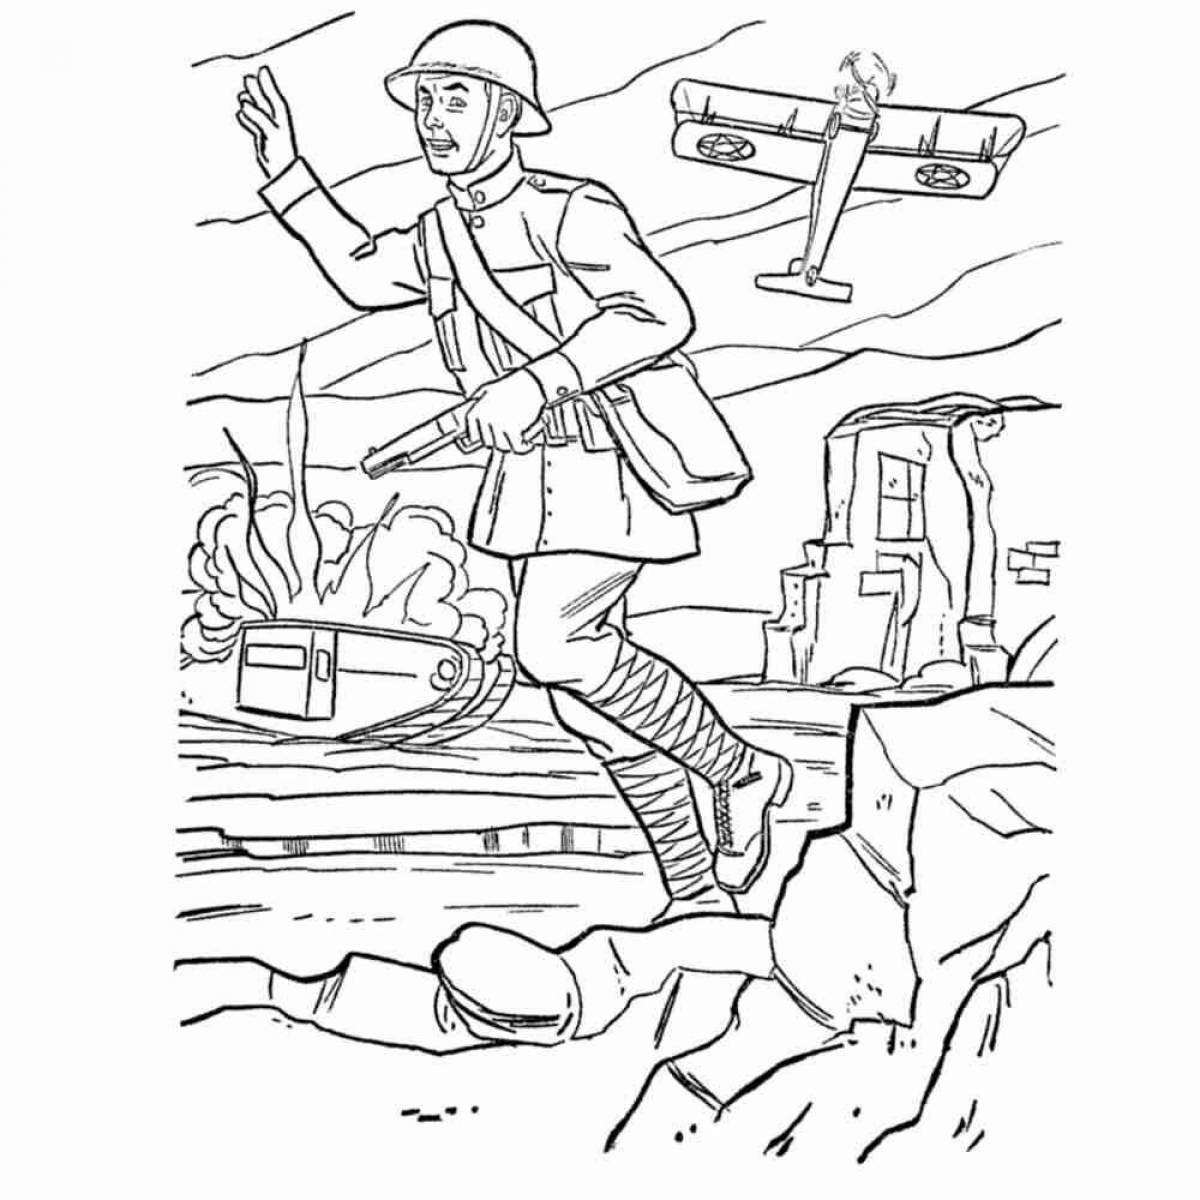 Dazzling Soldier coloring page February 23